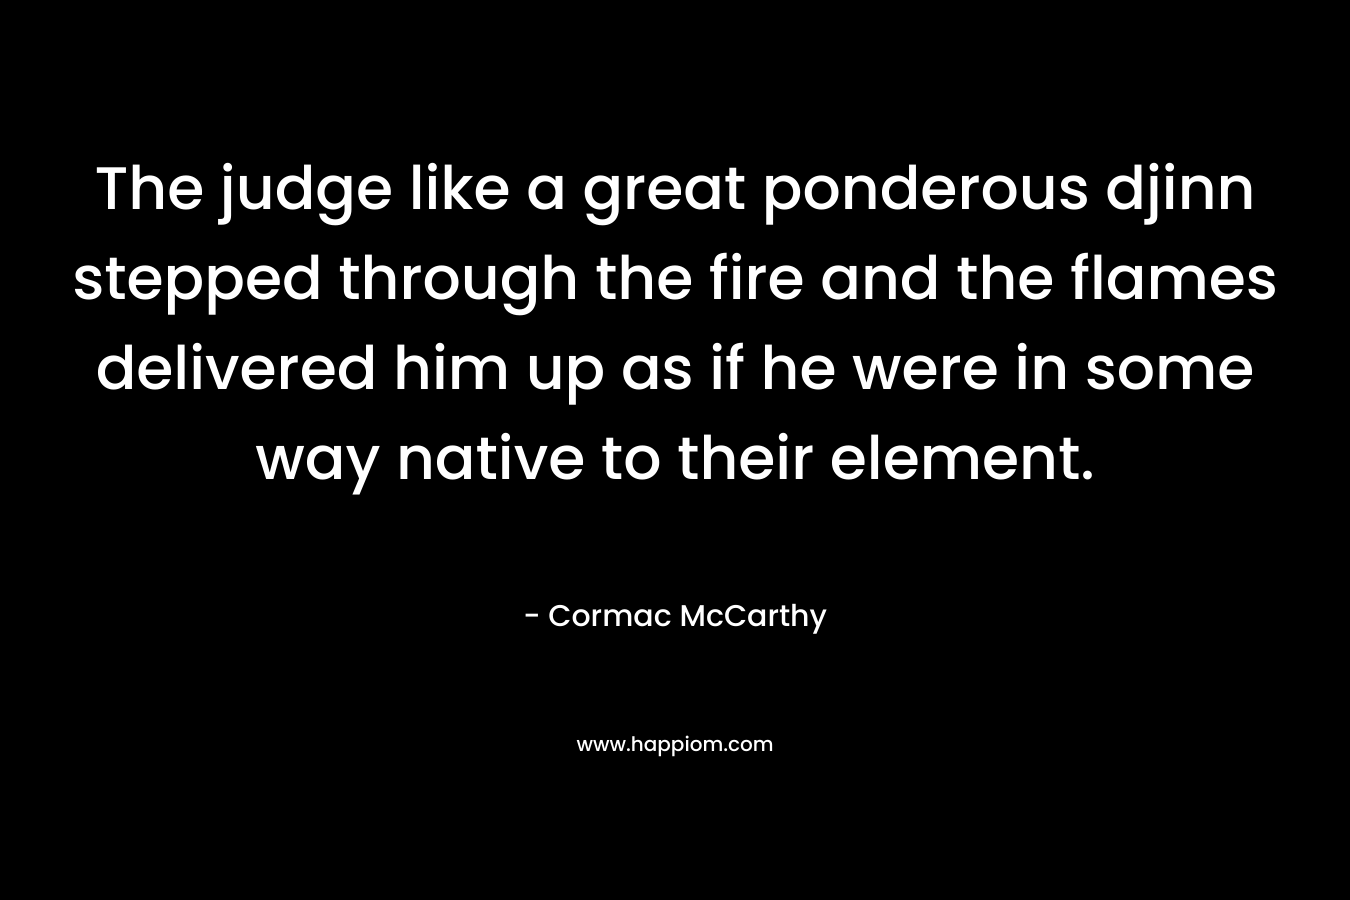 The judge like a great ponderous djinn stepped through the fire and the flames delivered him up as if he were in some way native to their element. – Cormac McCarthy